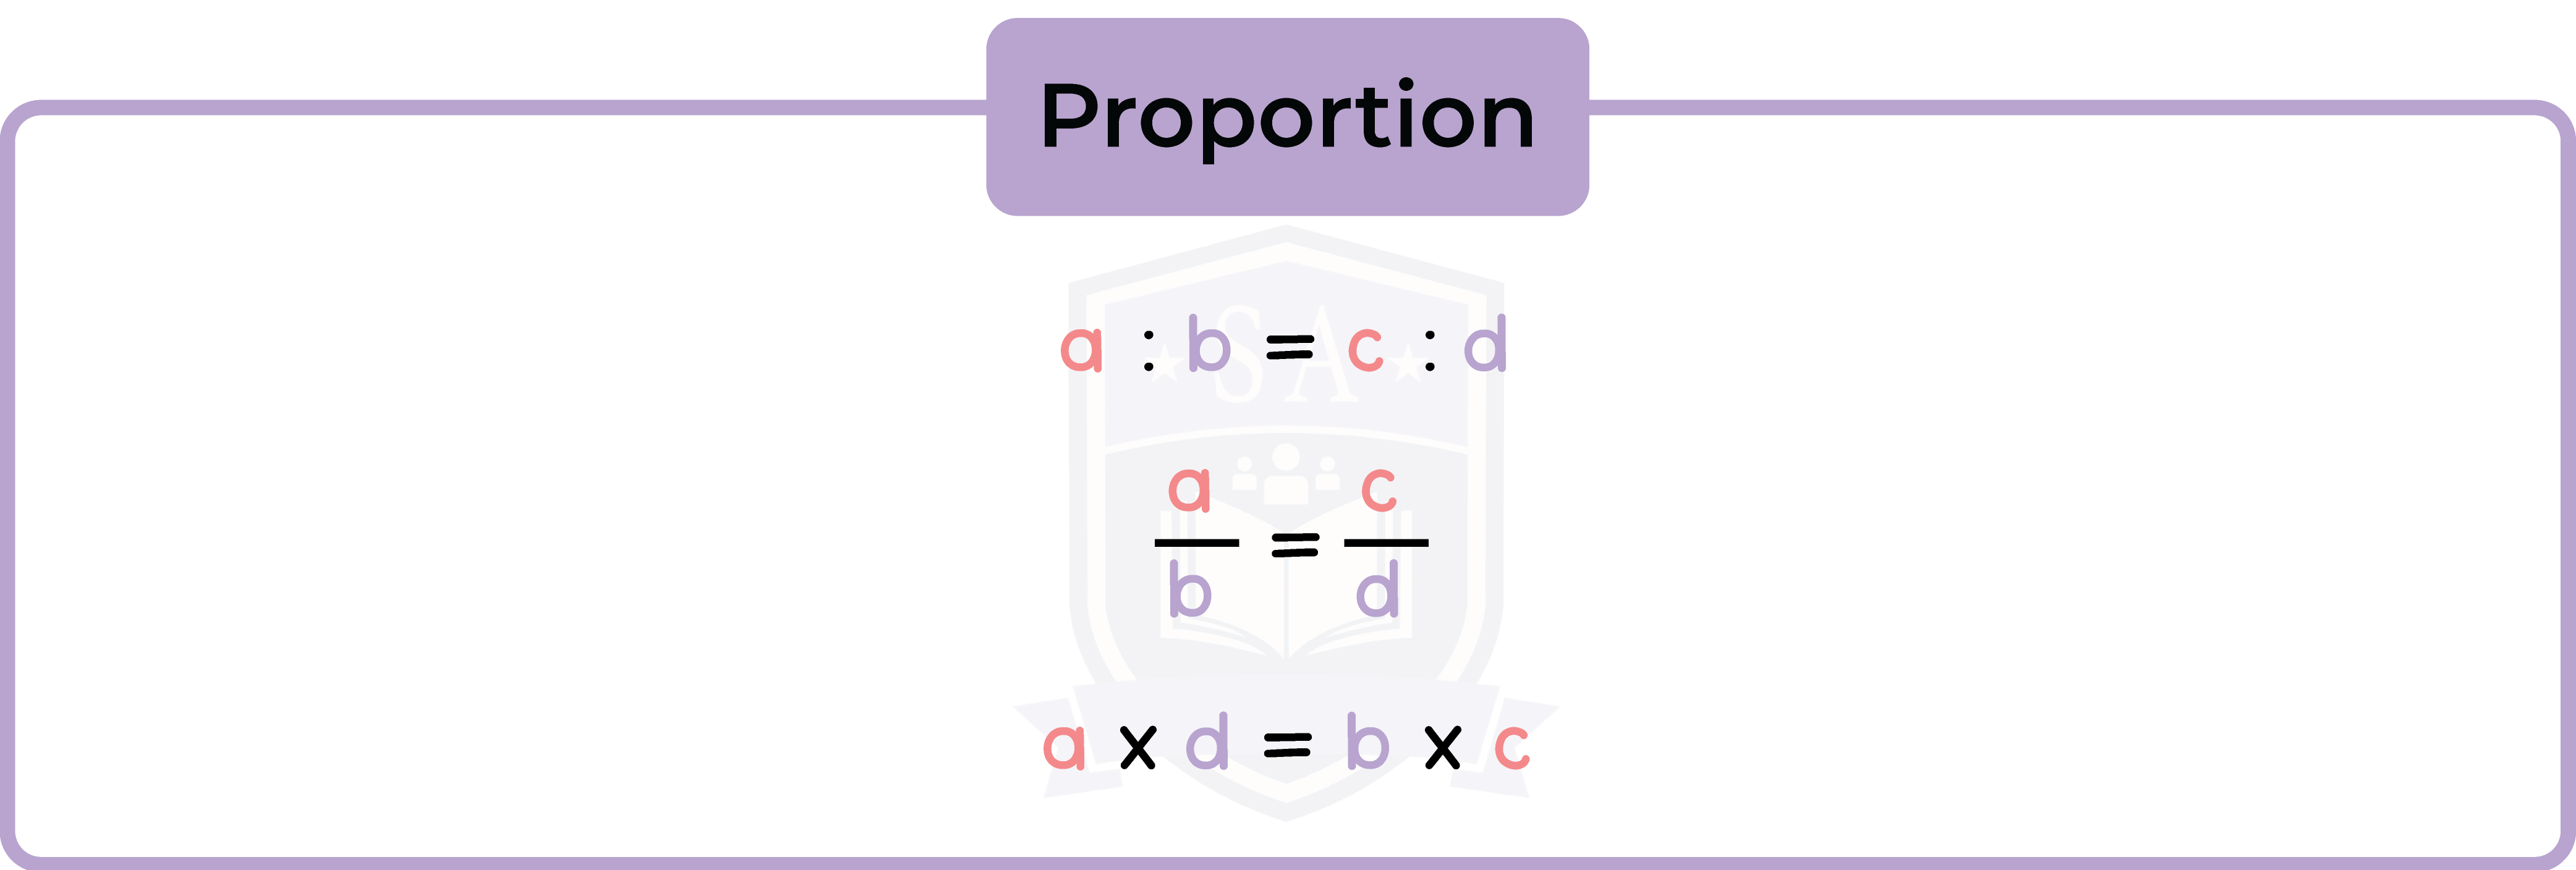 edexcel_igcse_mathematics a_topic 07_ratio and proportion_001_introduction to proportion